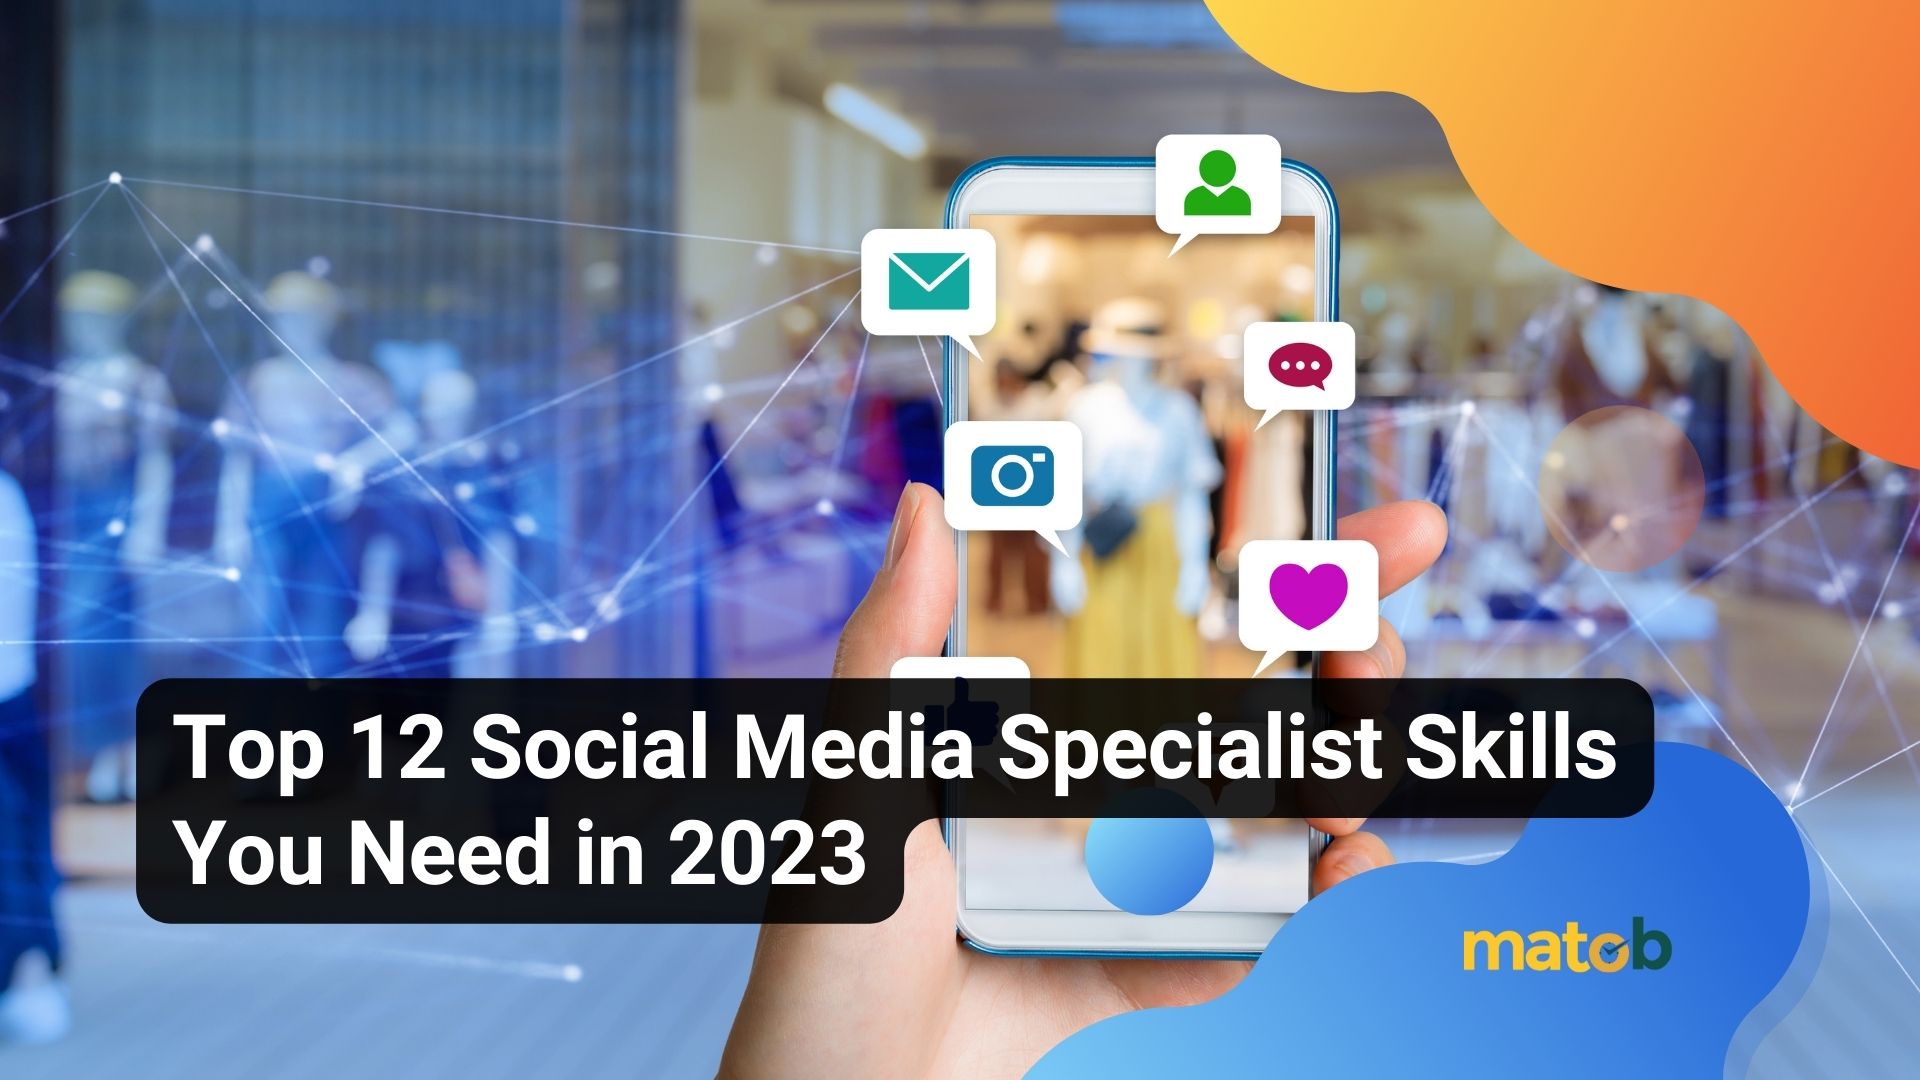 Top 12 Social Media Specialist Skills You Need in 2023